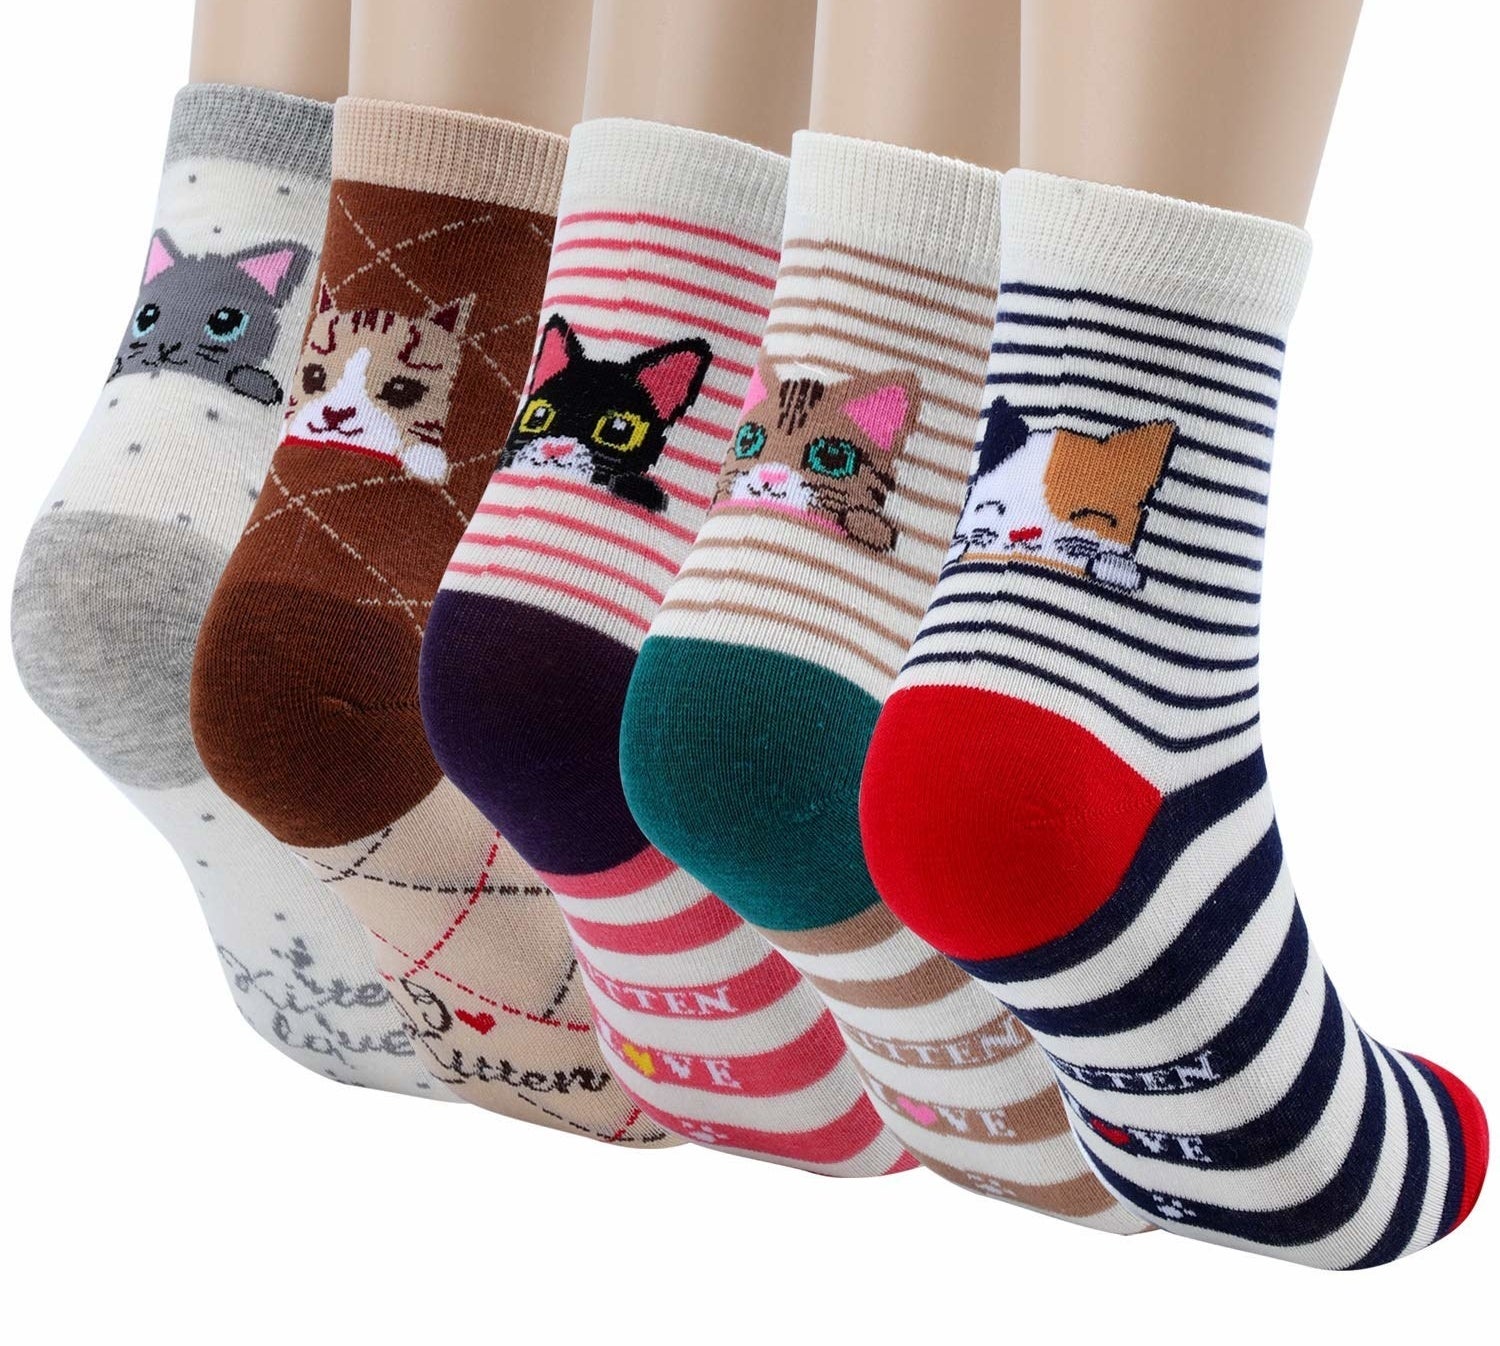 The patterned socks each with a different color cat face peeking over the heel